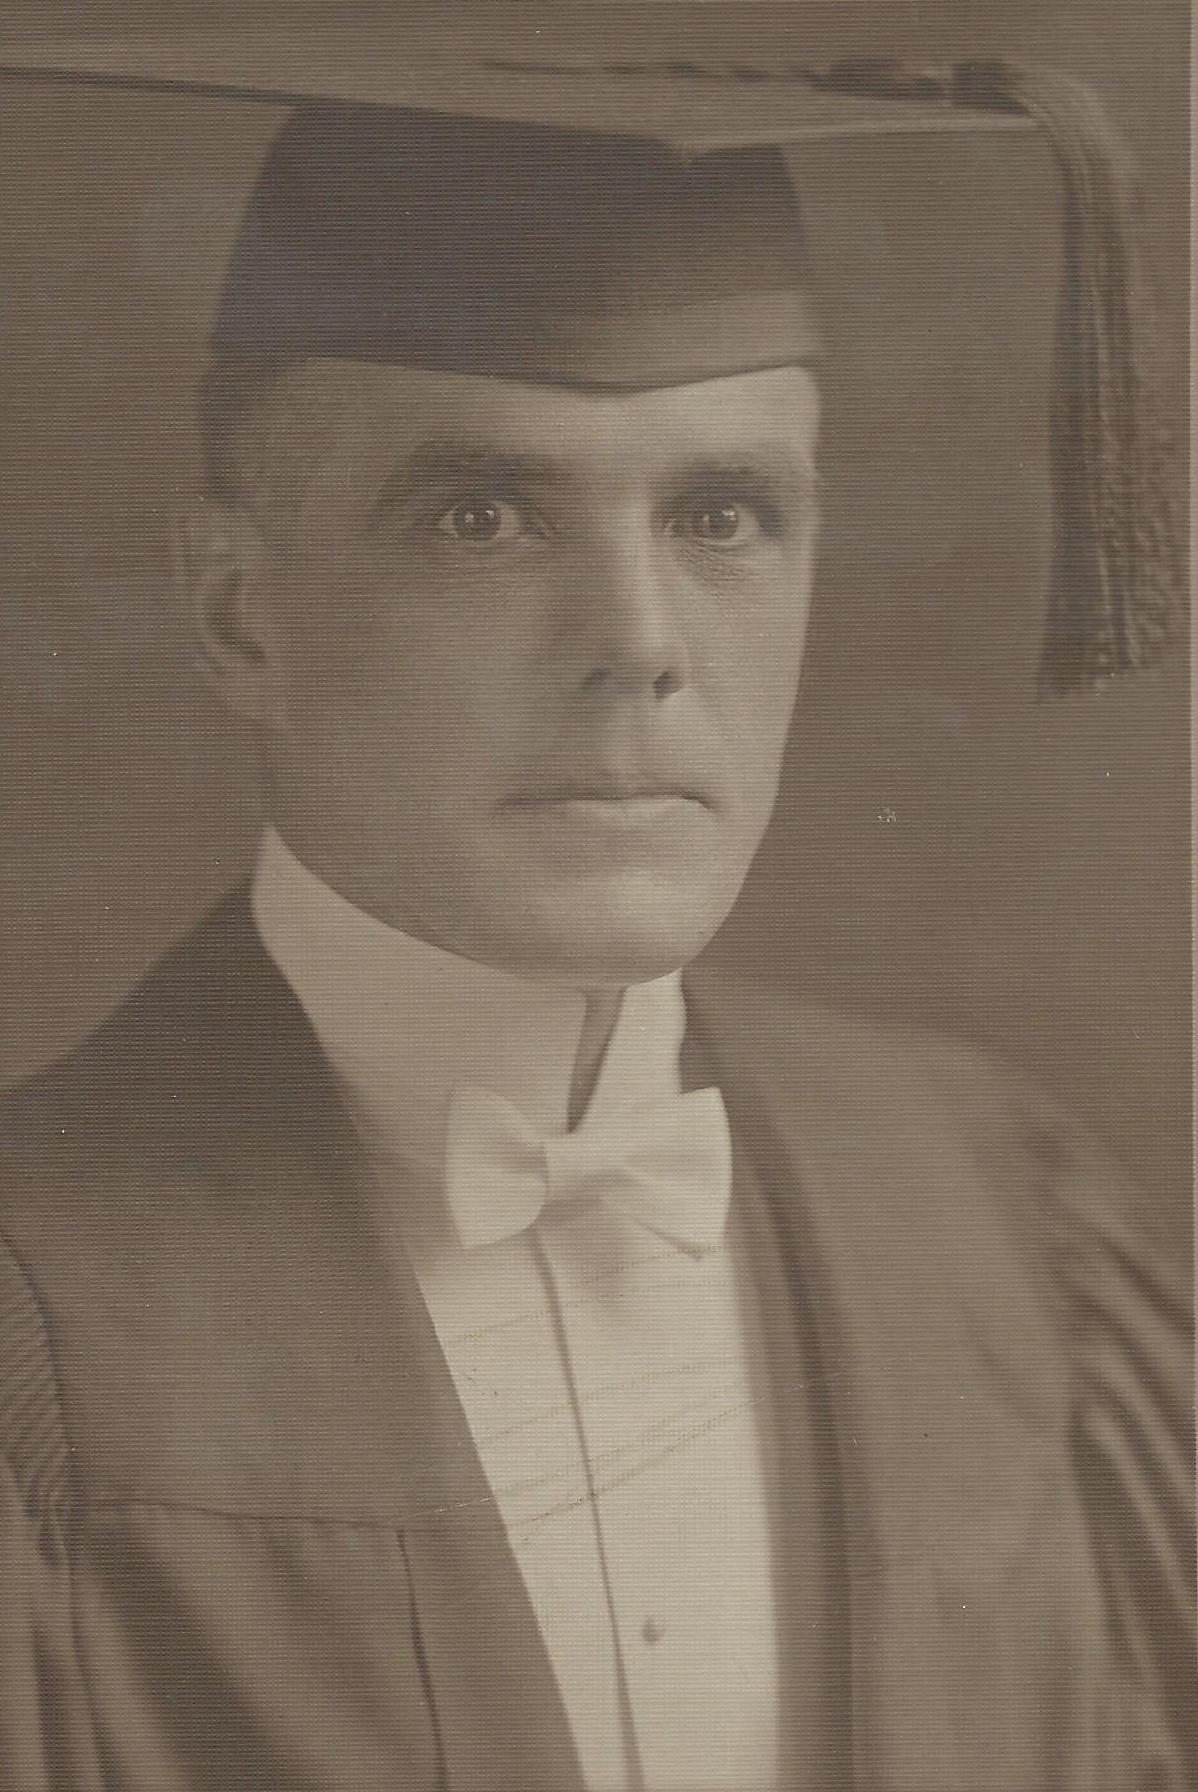 Elmer Merrill graduation picture (probably from his chiropractic training)